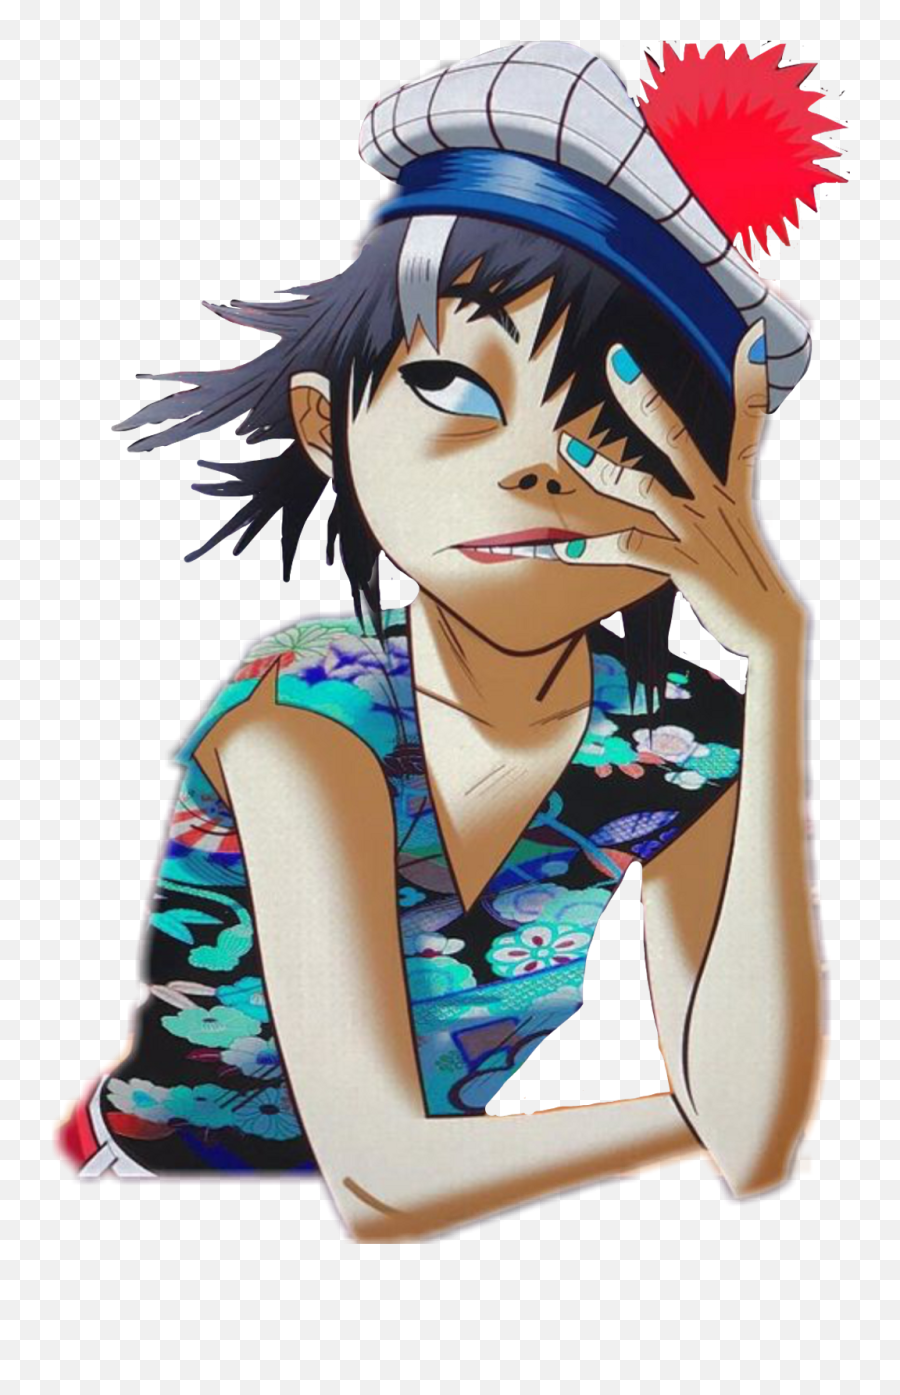 Download Report Abuse - Gorillaz Iphone Case Png Image With Noodle Gorillaz Phase 4 Emoji,Iphone Emojis Commercial Girl